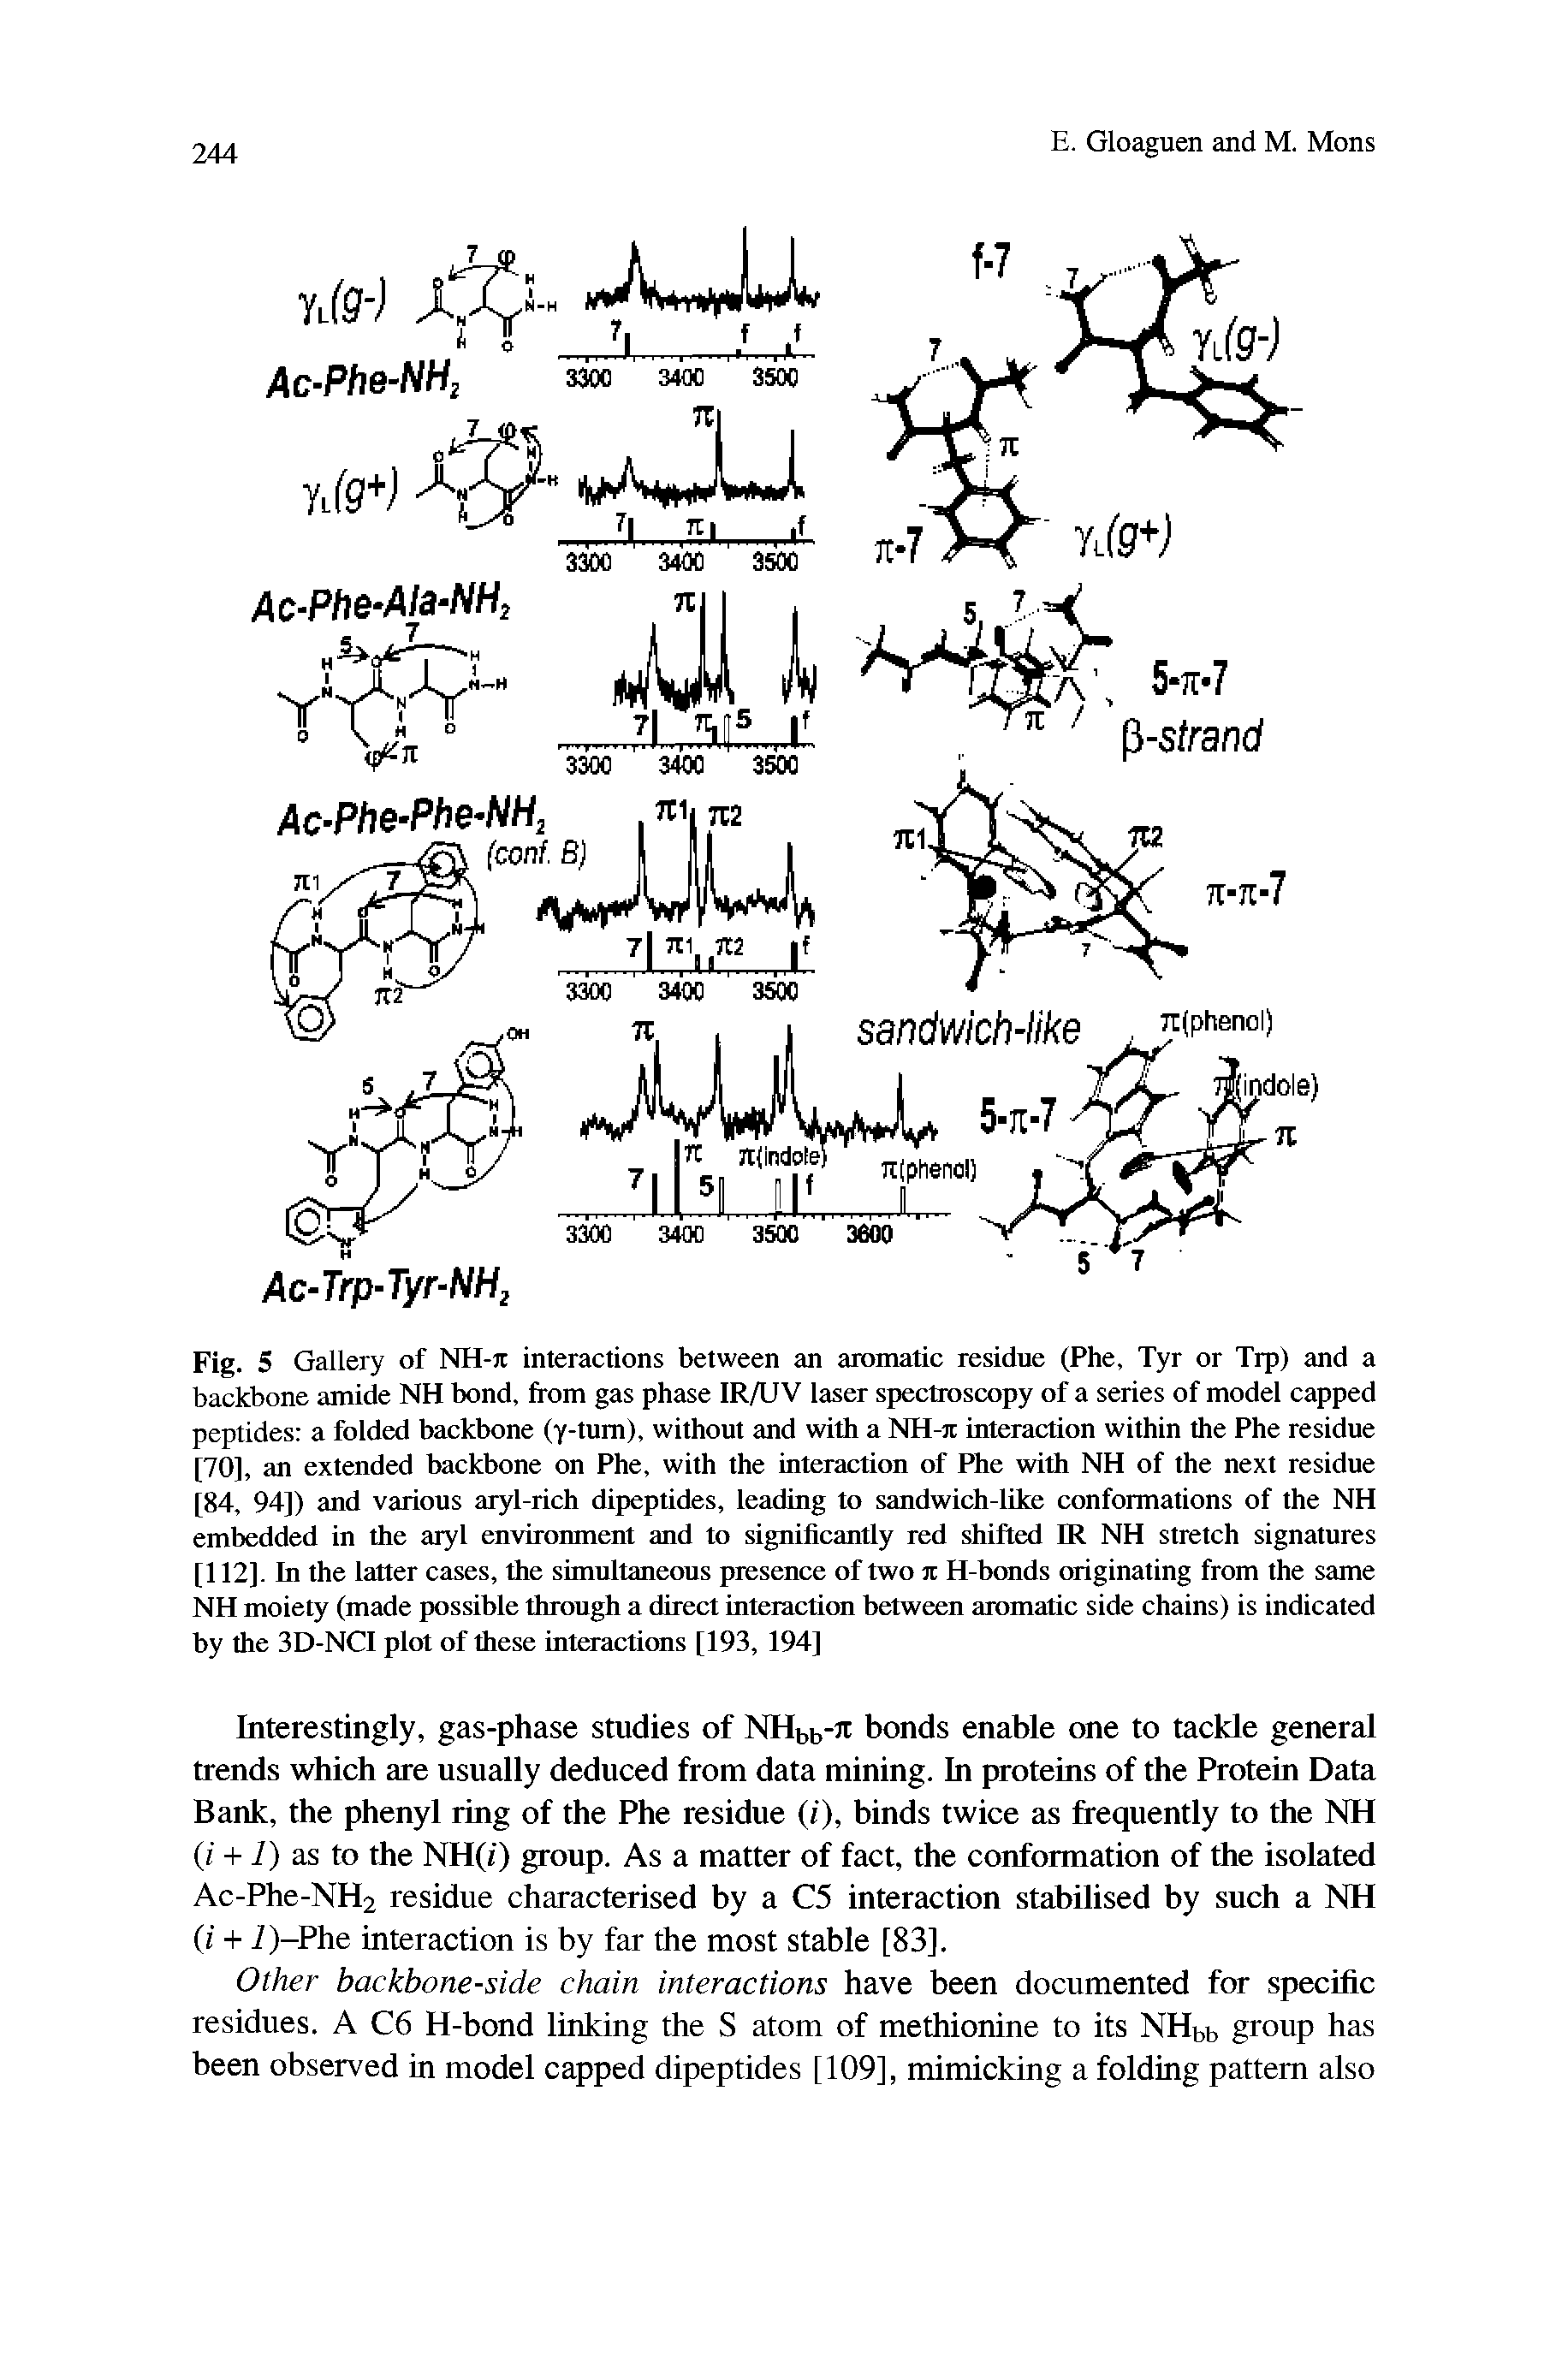 Fig. 5 Gallery of NH-)t interactions between an aromatic residne (Phe, Tyr or Tip) and a backbone amide NH bond, from gas phase IR/UV laser spectroscopy of a series of model capped peptides a folded backbone (y-tum), without and with a NH-ic interaction within the Phe residue [70], an extended backbone on Phe, with the interaction of Phe with NH of the next residue [84, 94]) and various aryl-rich dipeptides, leading to sandwich-Uke conformations of the NH embedded in the aryl environment and to significantly red shifted IR NH stretch signatures [112]. In the latter cases, the simultaneous presence of two it H-txaids raiginating from the same NH moiety (made possible through a direct interactiim between aromatic side chains) is indicated by the 3D-NCI plot of these interactions [193, 194]...